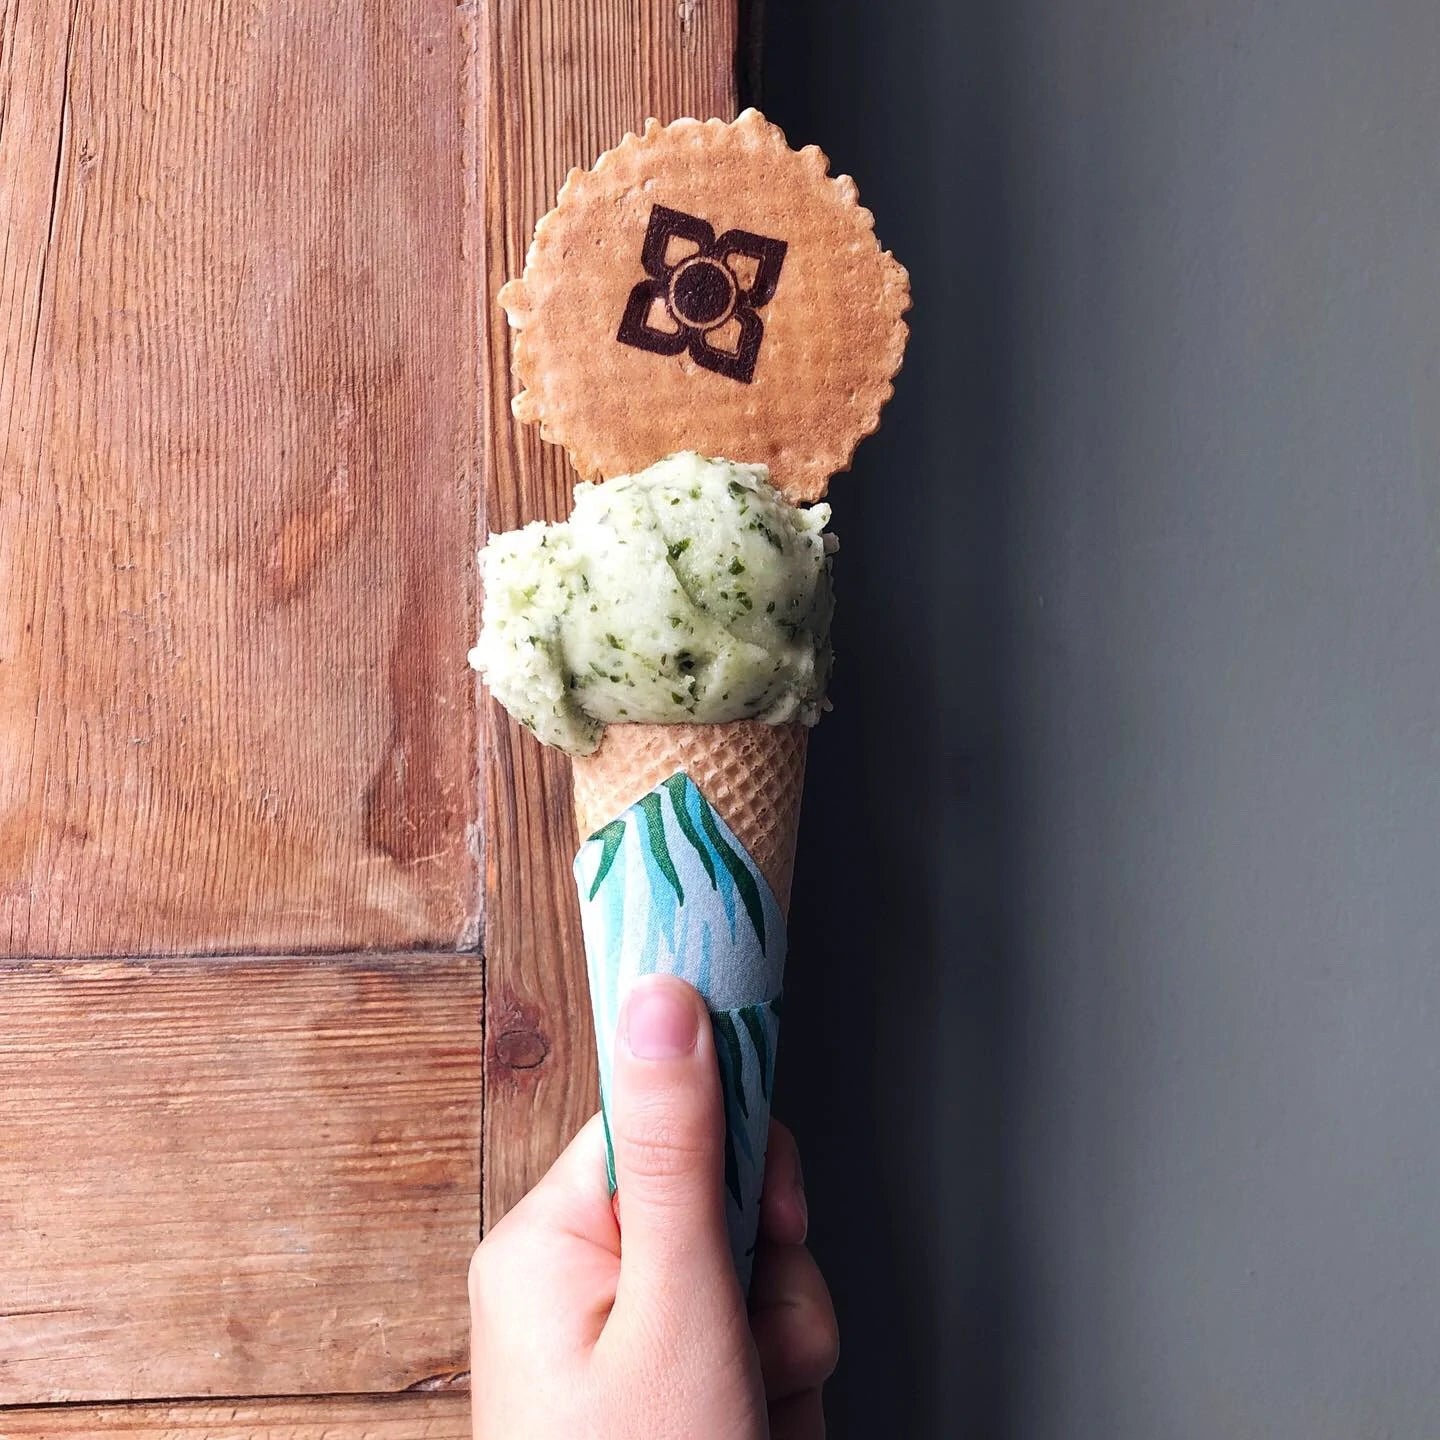 Scoop of mint and cucumber sorbet on a cone with a wafer